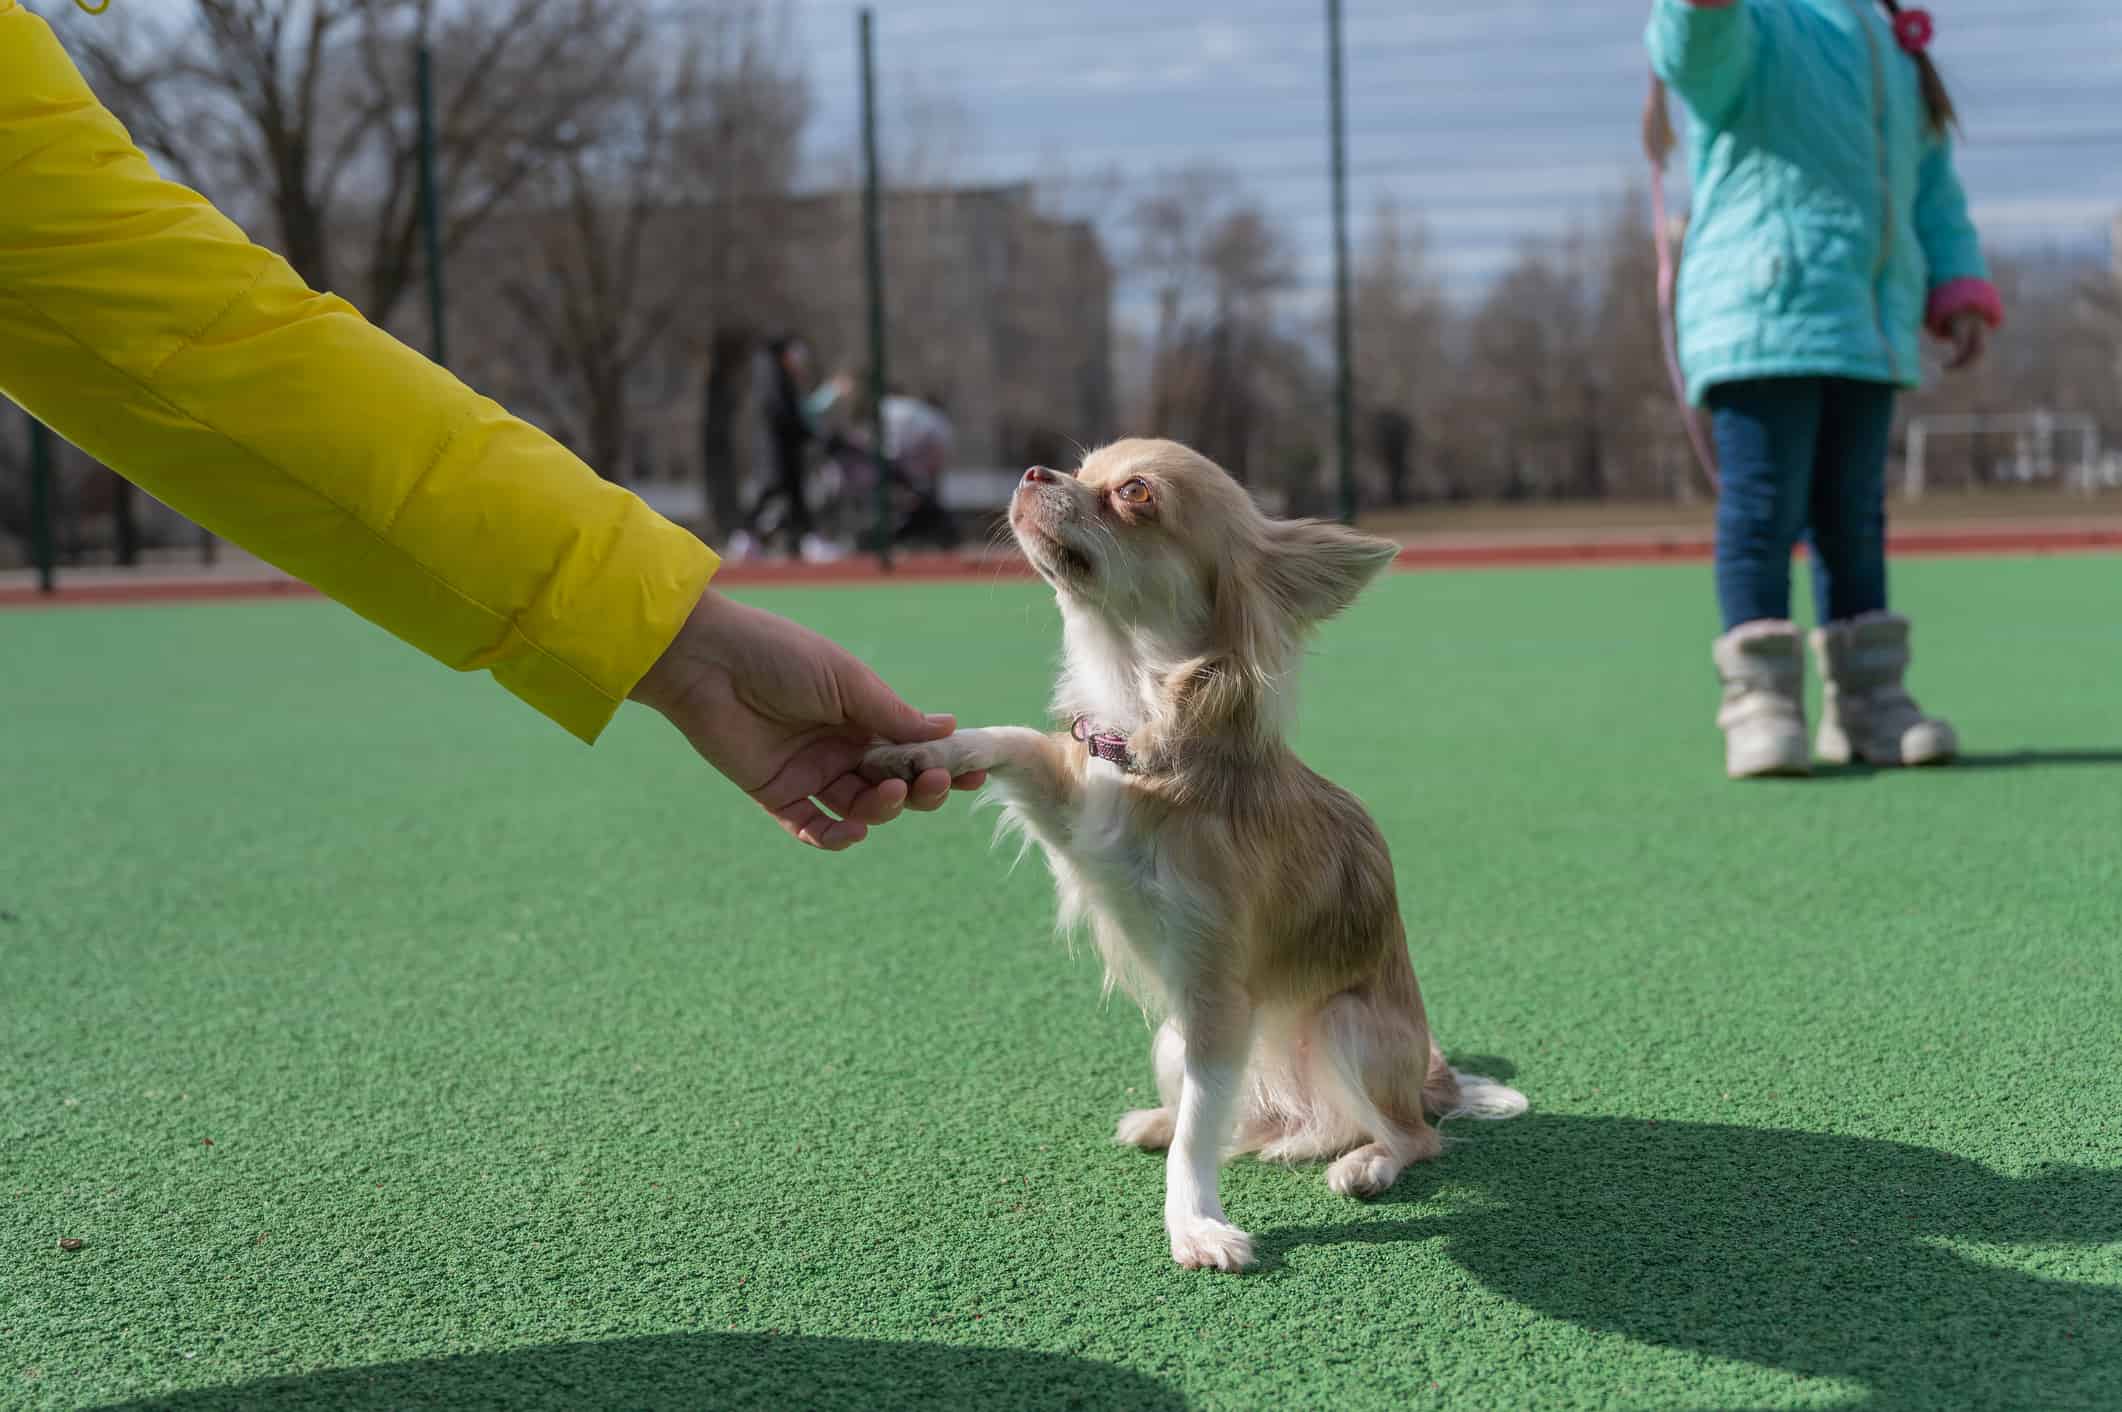 A dog of the Chihuahua breed gives his paw to the owner. The little animal stands on the green surface of the sports field. A five-year-old girl in the background. A family walk with a pet. Outside.